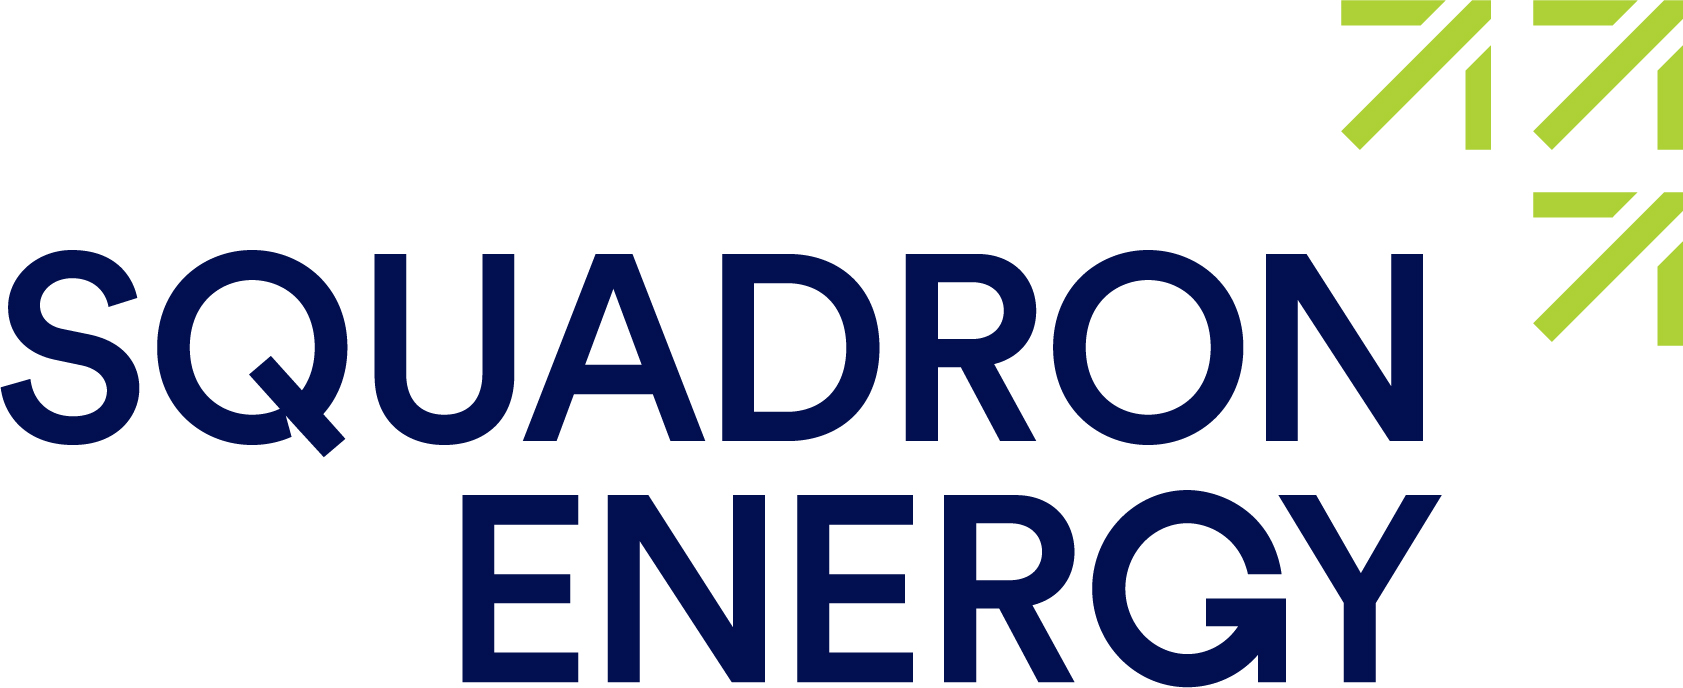 Squadron Energy logo featuring navy text and lime green arrows